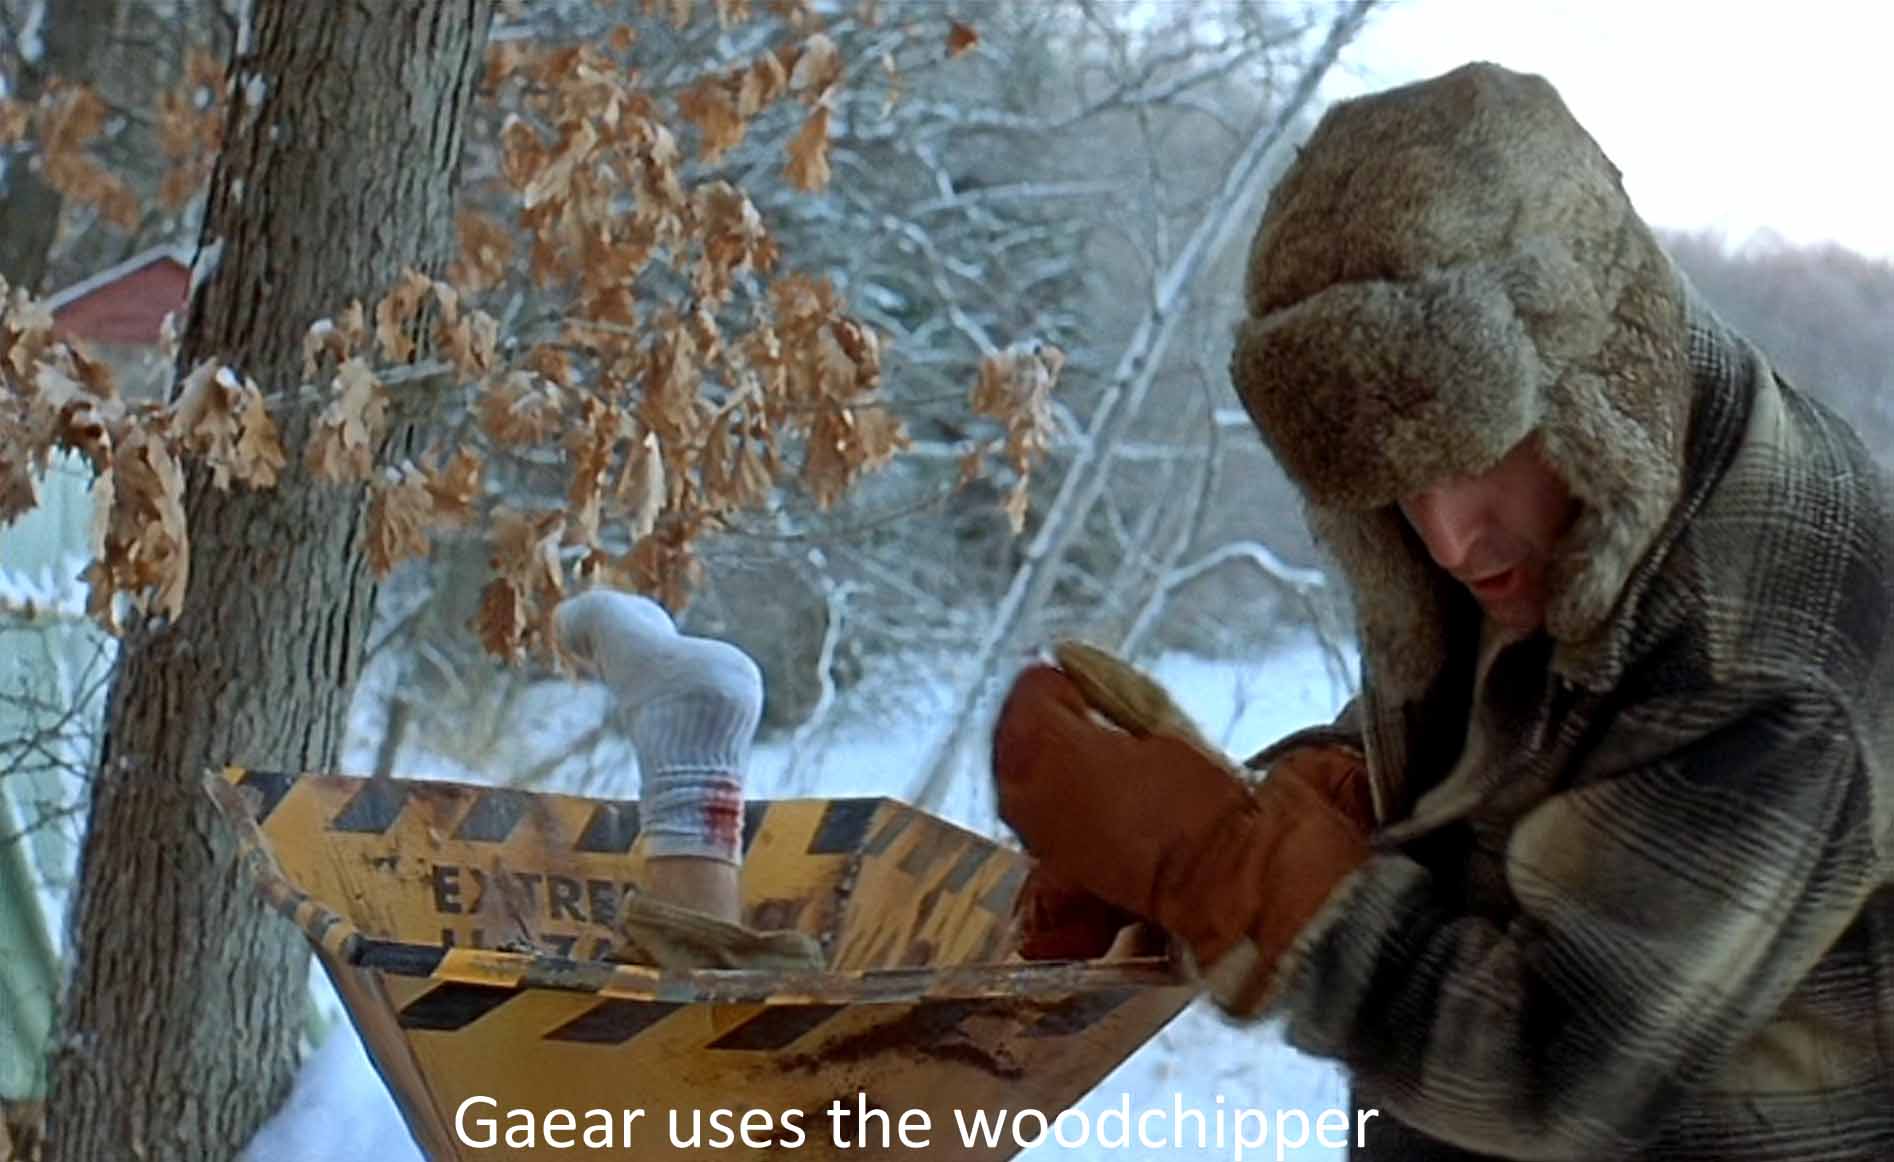 Gaear uses the woodchipper